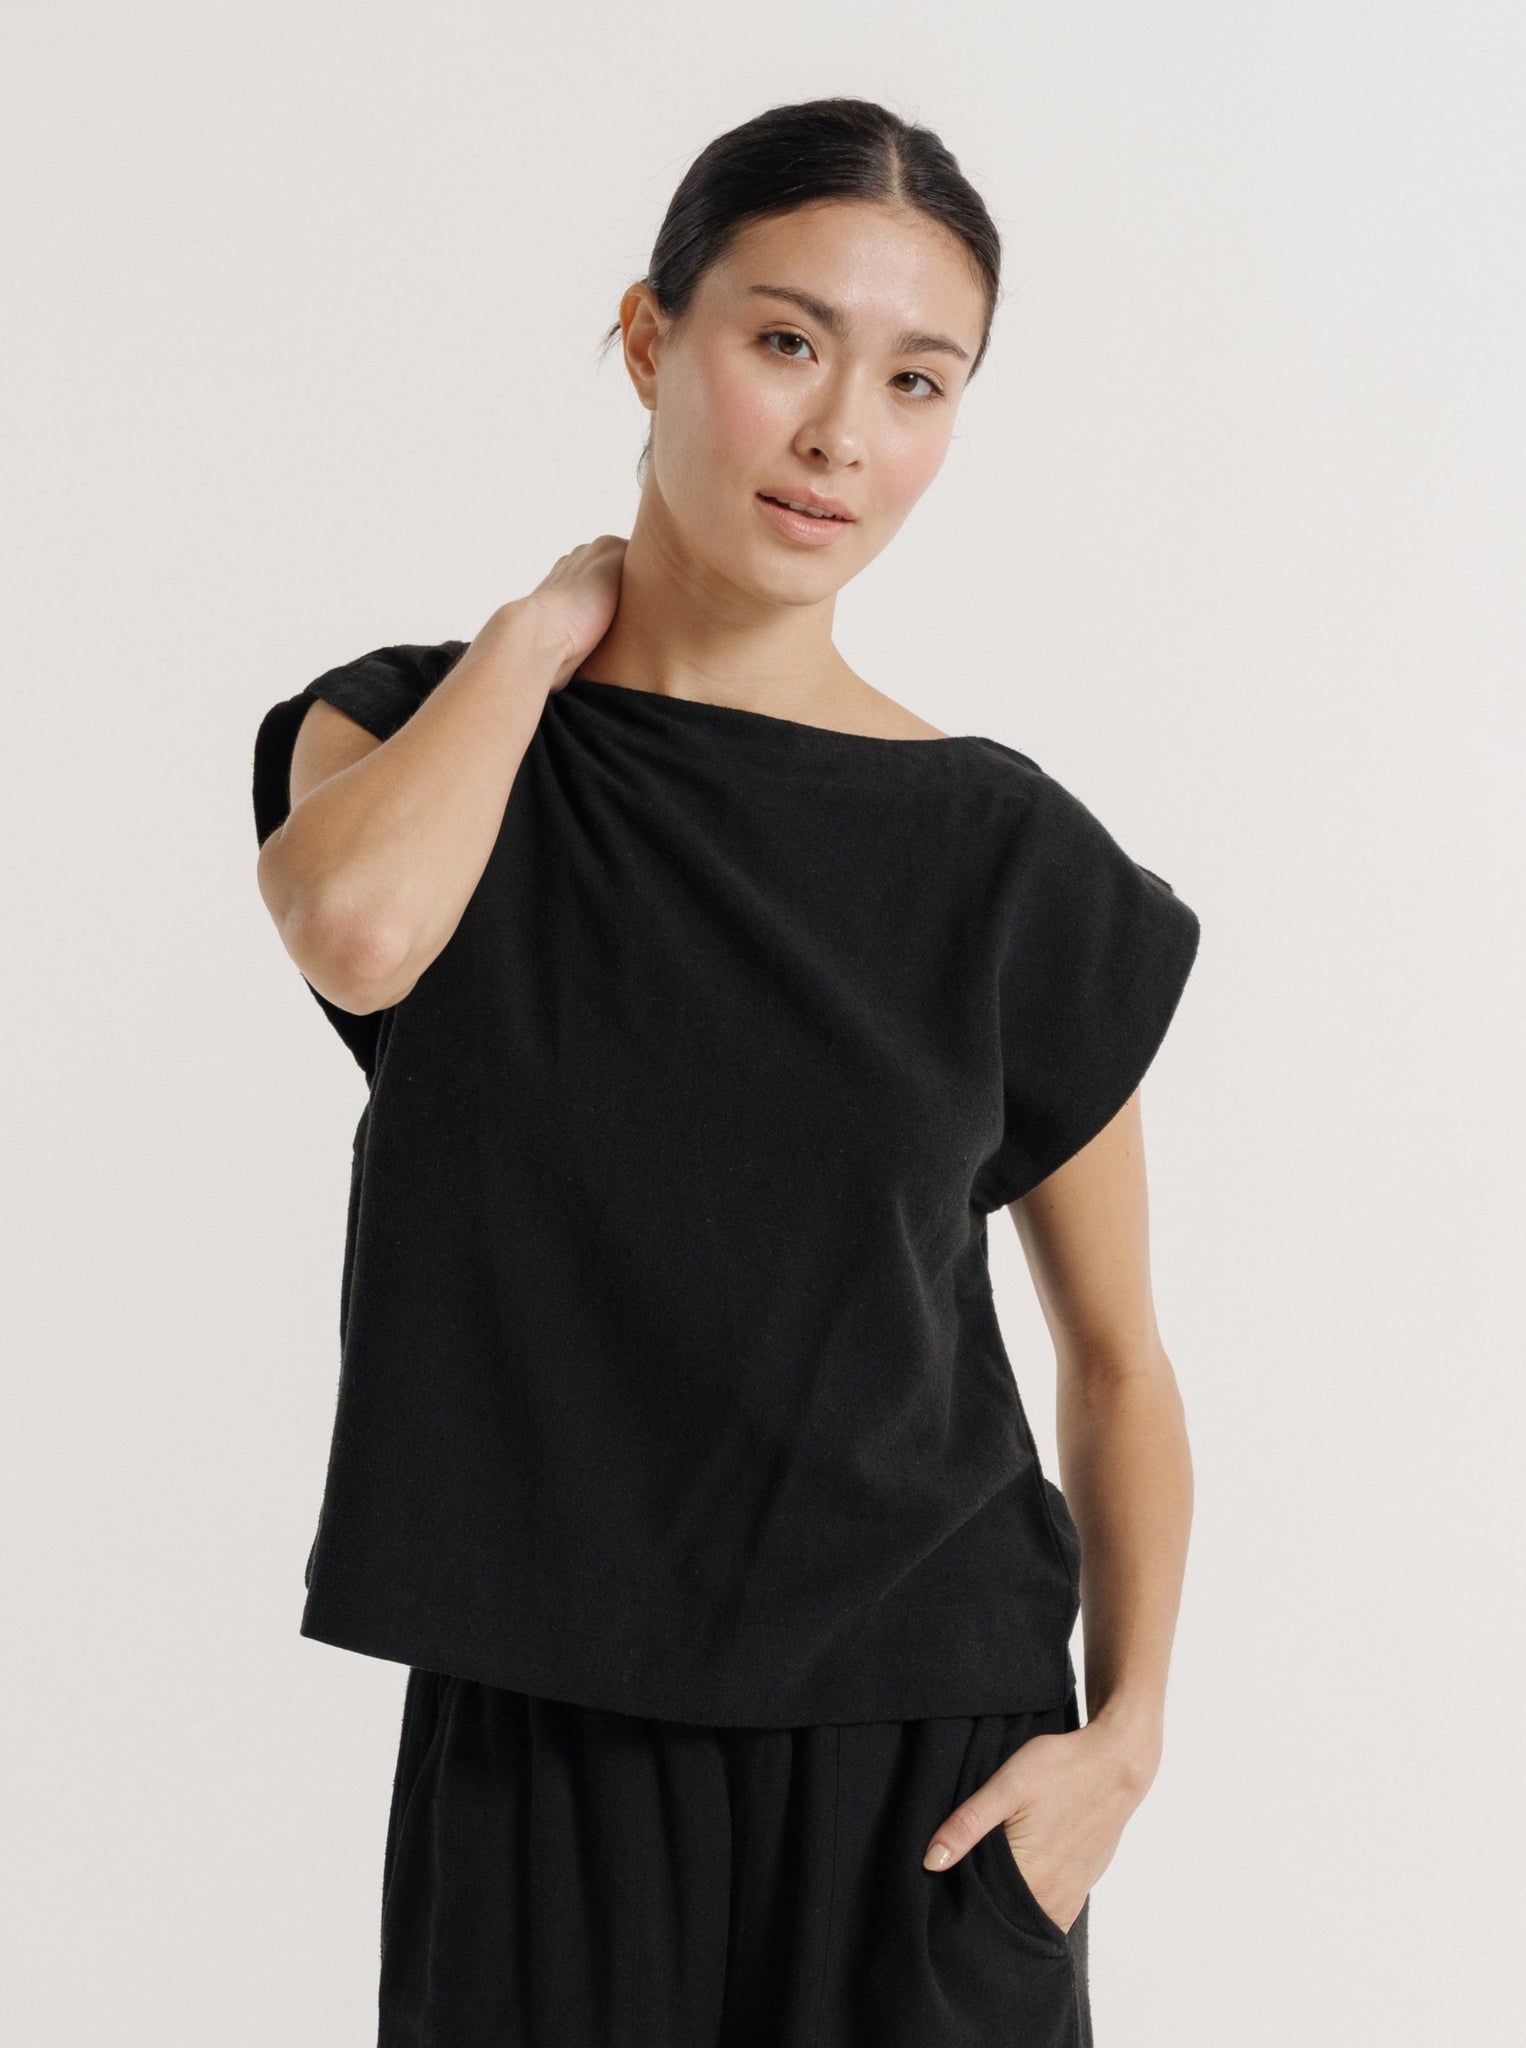 A woman wearing the Everyday Top - Black Silk Noil, showcasing sustainable fashion.